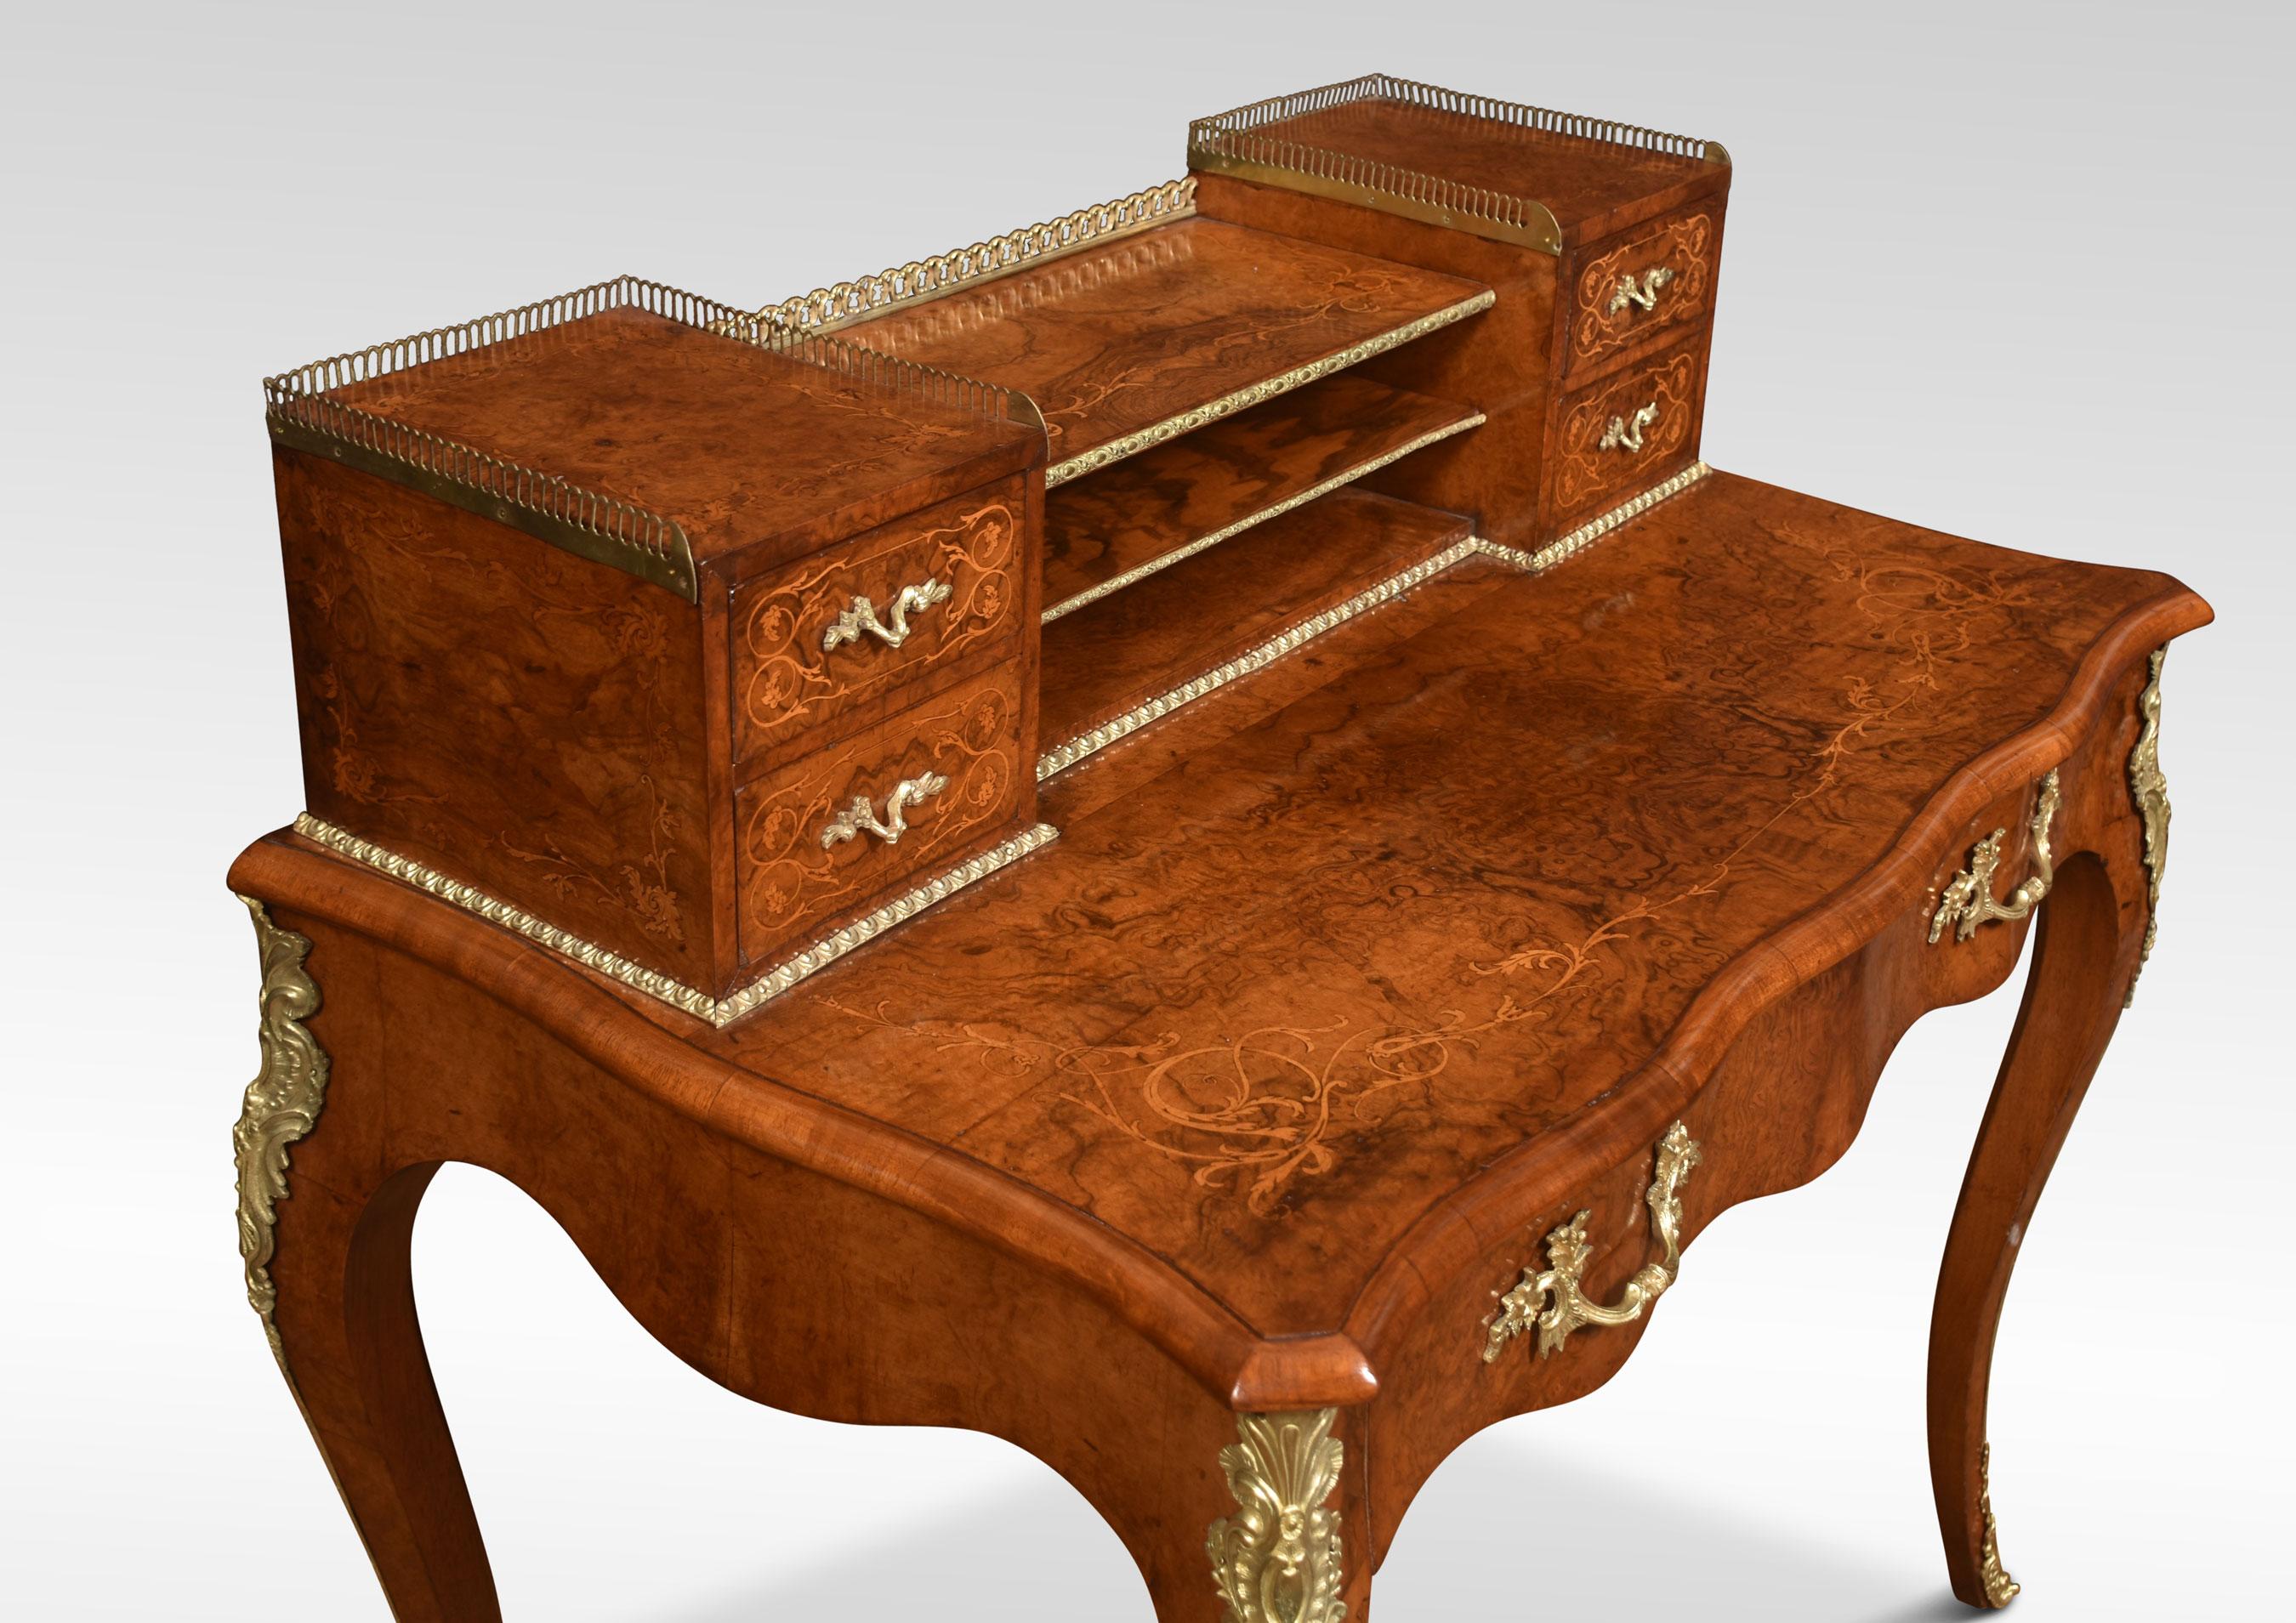 19th Century Walnut Inlaid Bonheur du Jour In Good Condition For Sale In Cheshire, GB